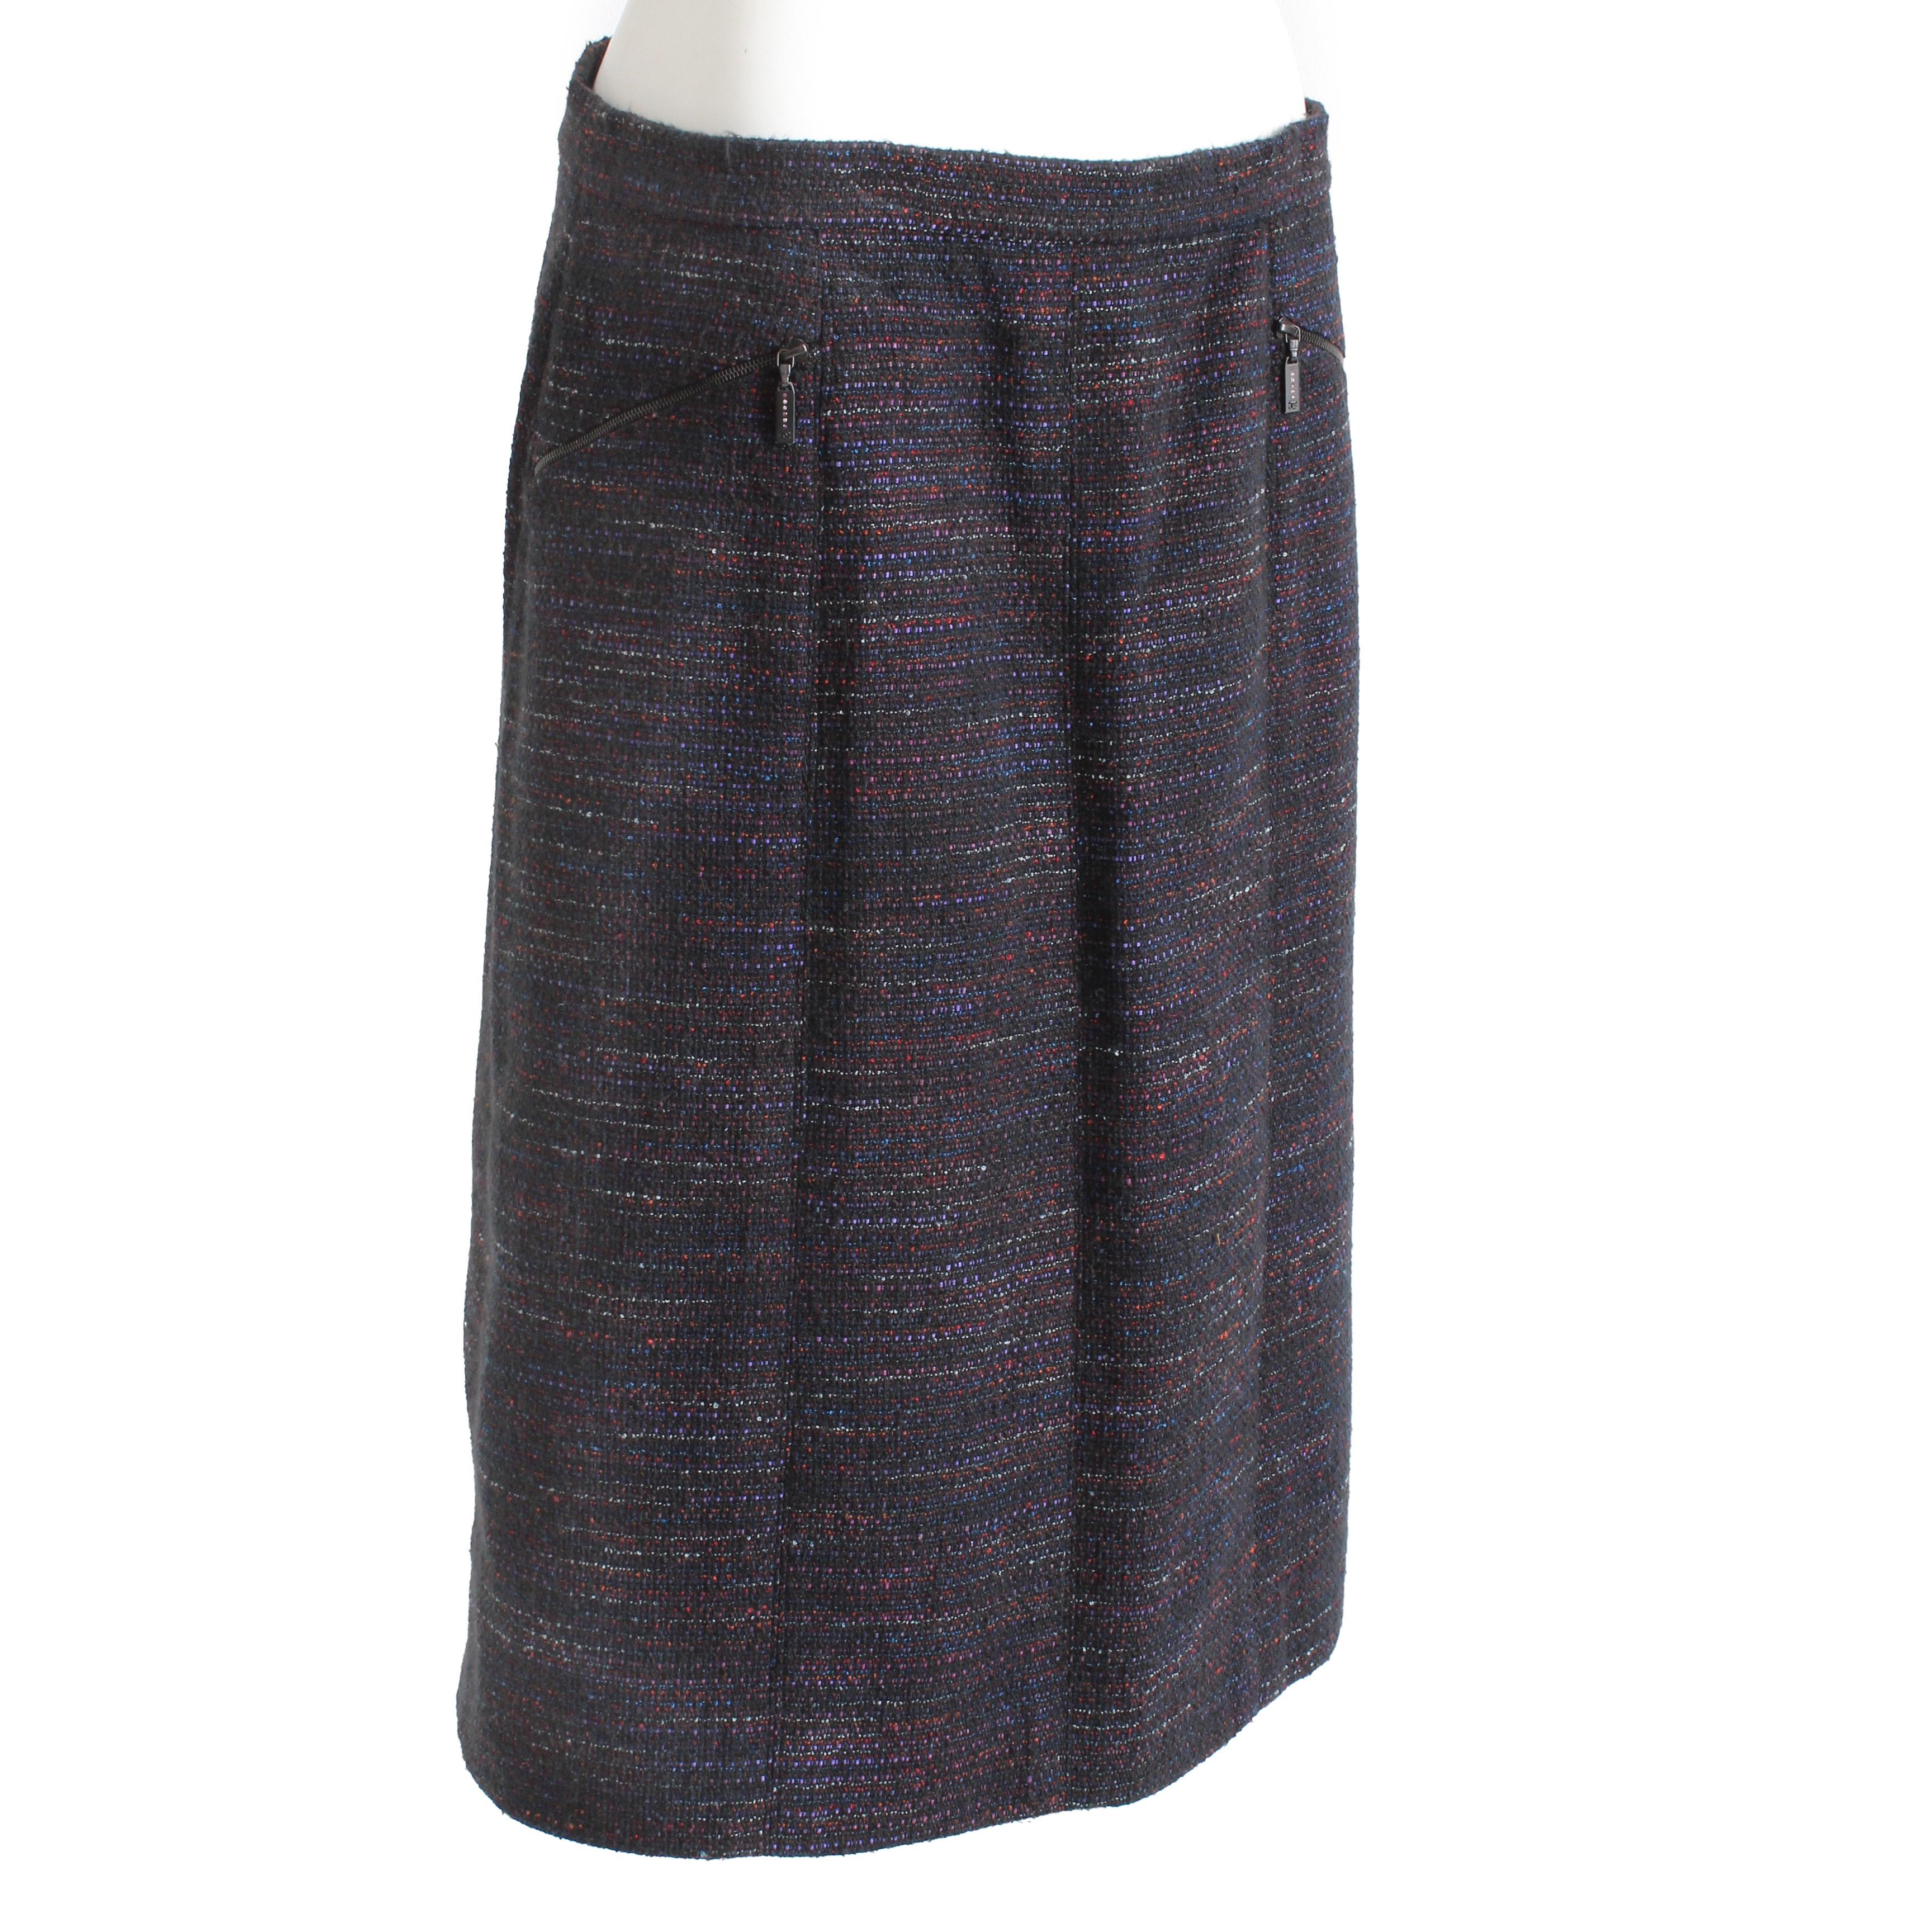 Authentic, preowned and vintage skirt, made by CHANEL for their 02A collection. Made from a gorgeous supple tweed with multicolor thread woven against a black background, it features two embellished CC zipper pull pockets in front and a CC button